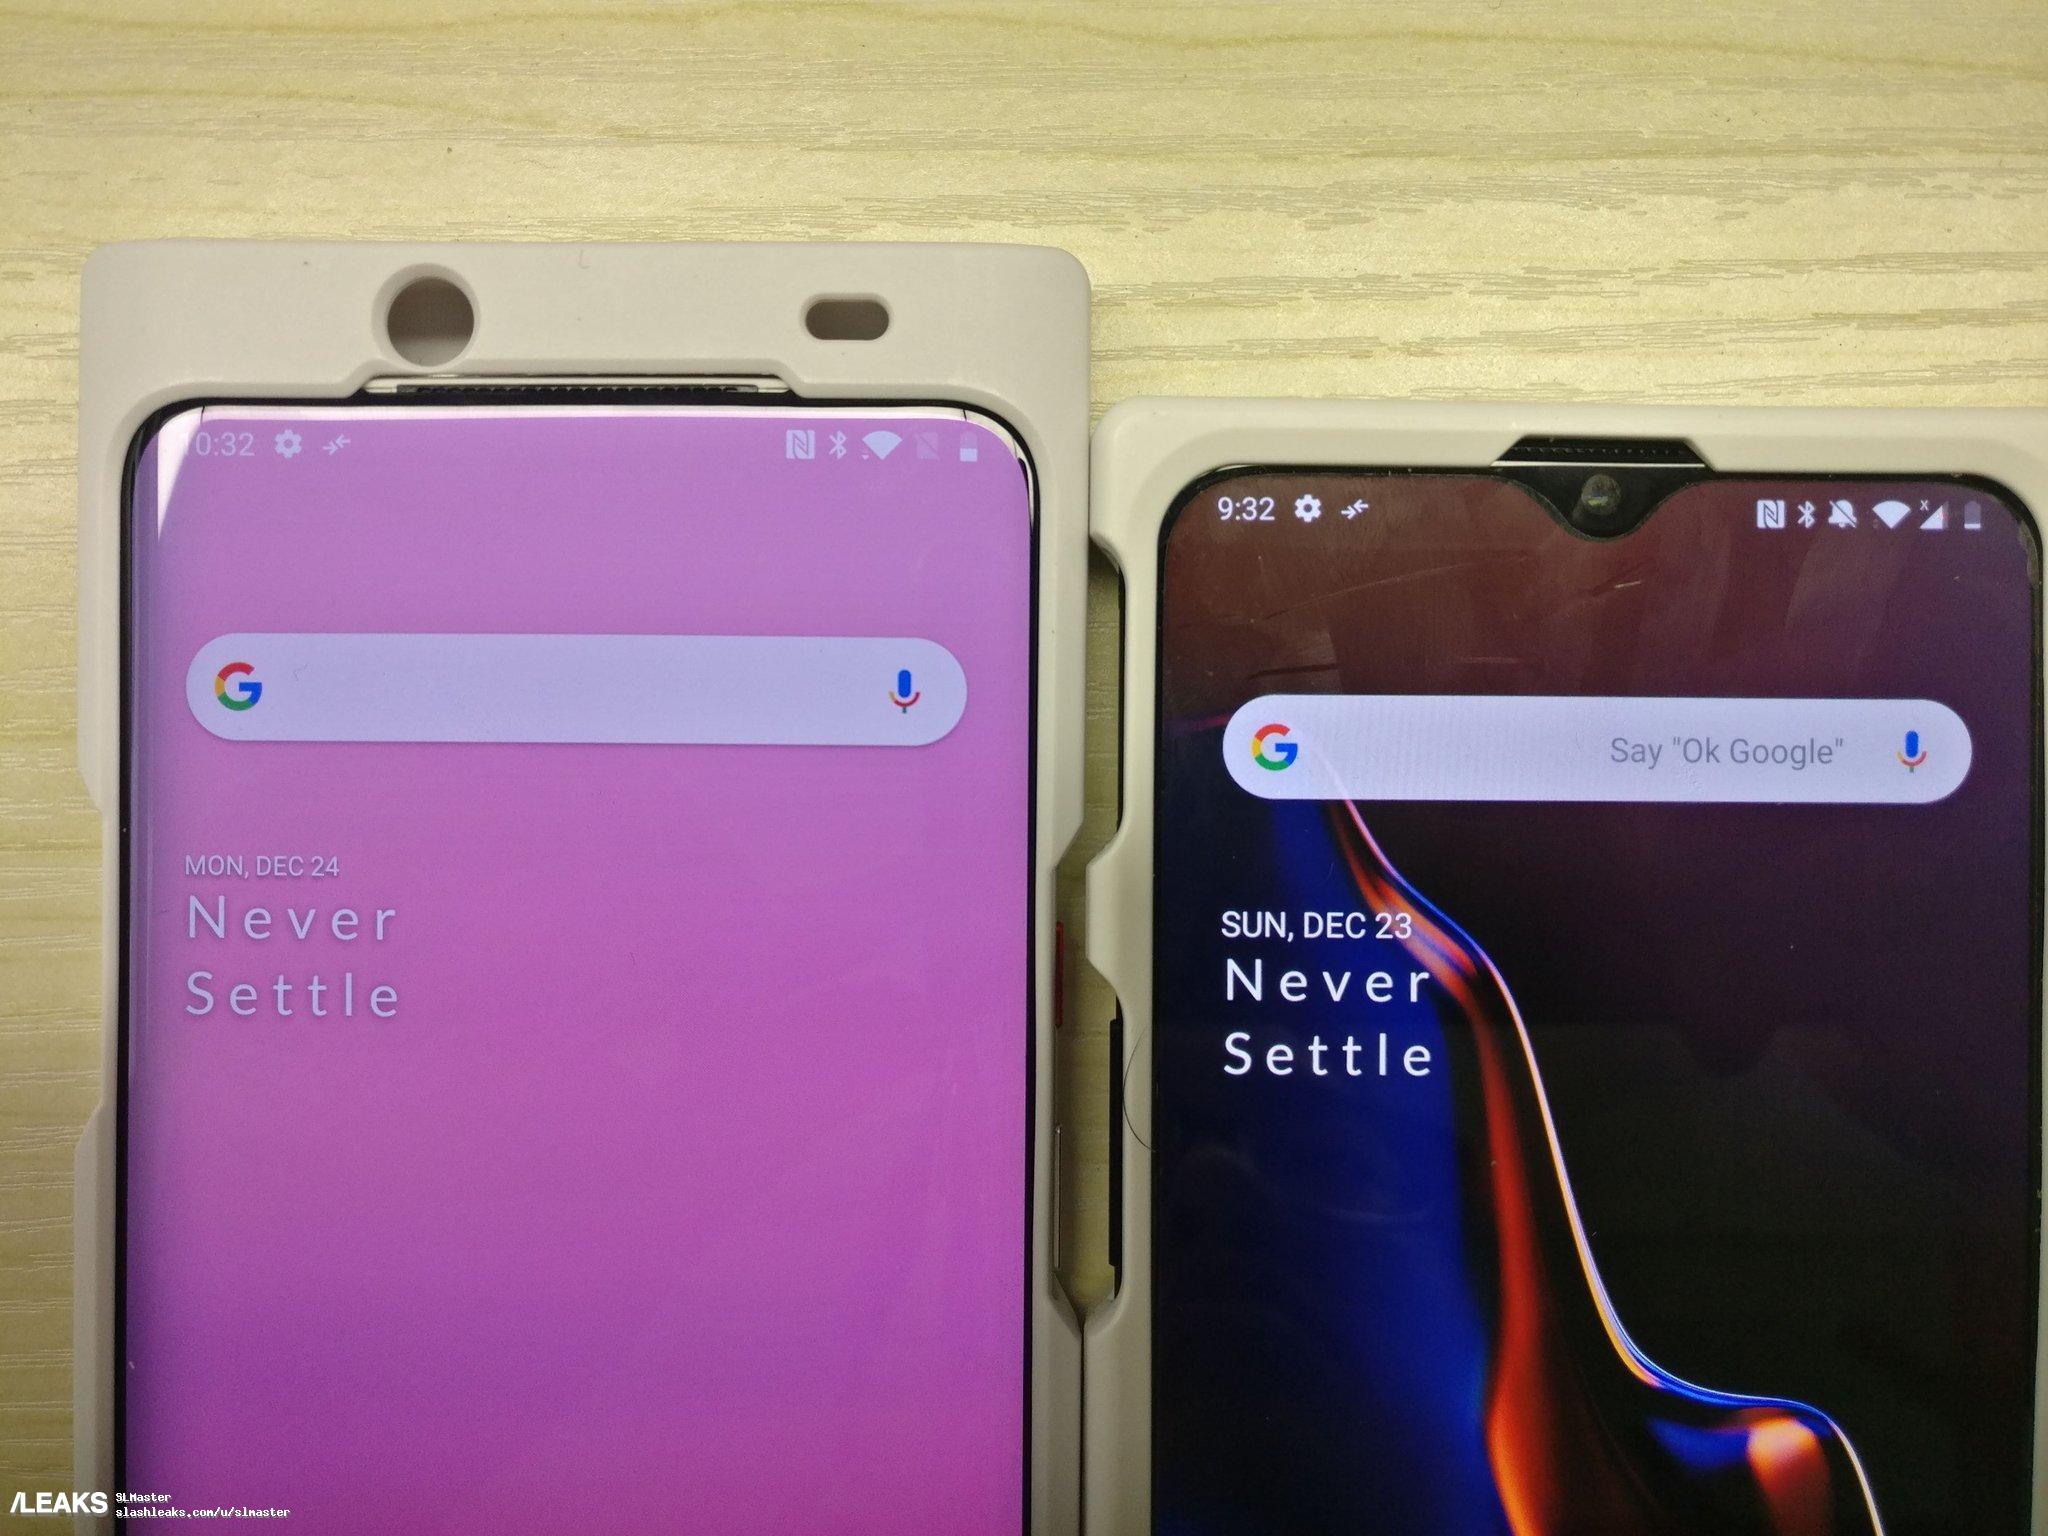 Early speculation: OnePlus 7 may feature HDR streaming out of box